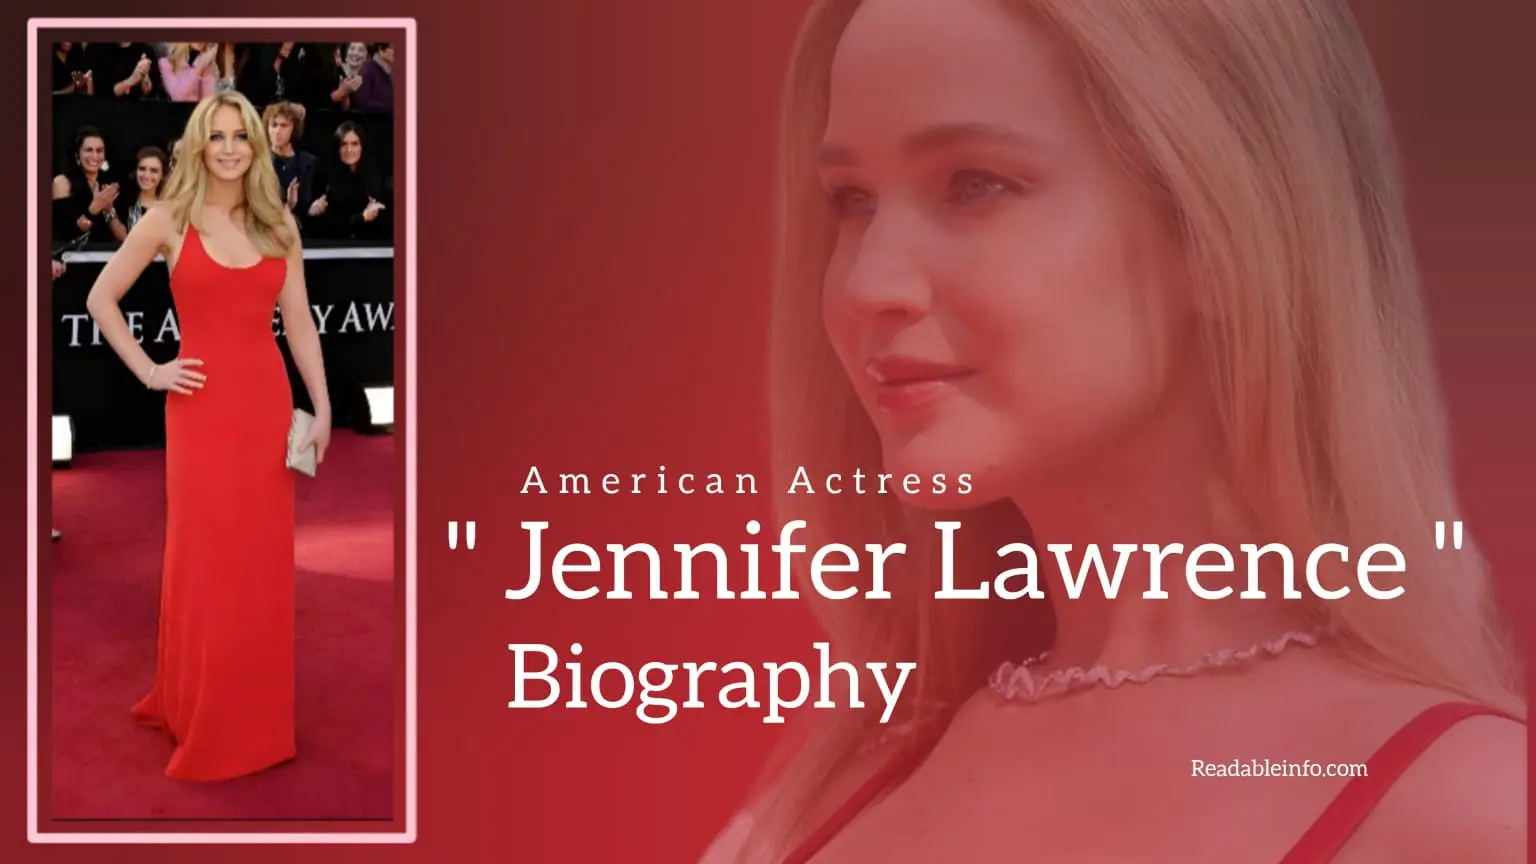 You are currently viewing Jennifer Lawrence Biography (American Actress)